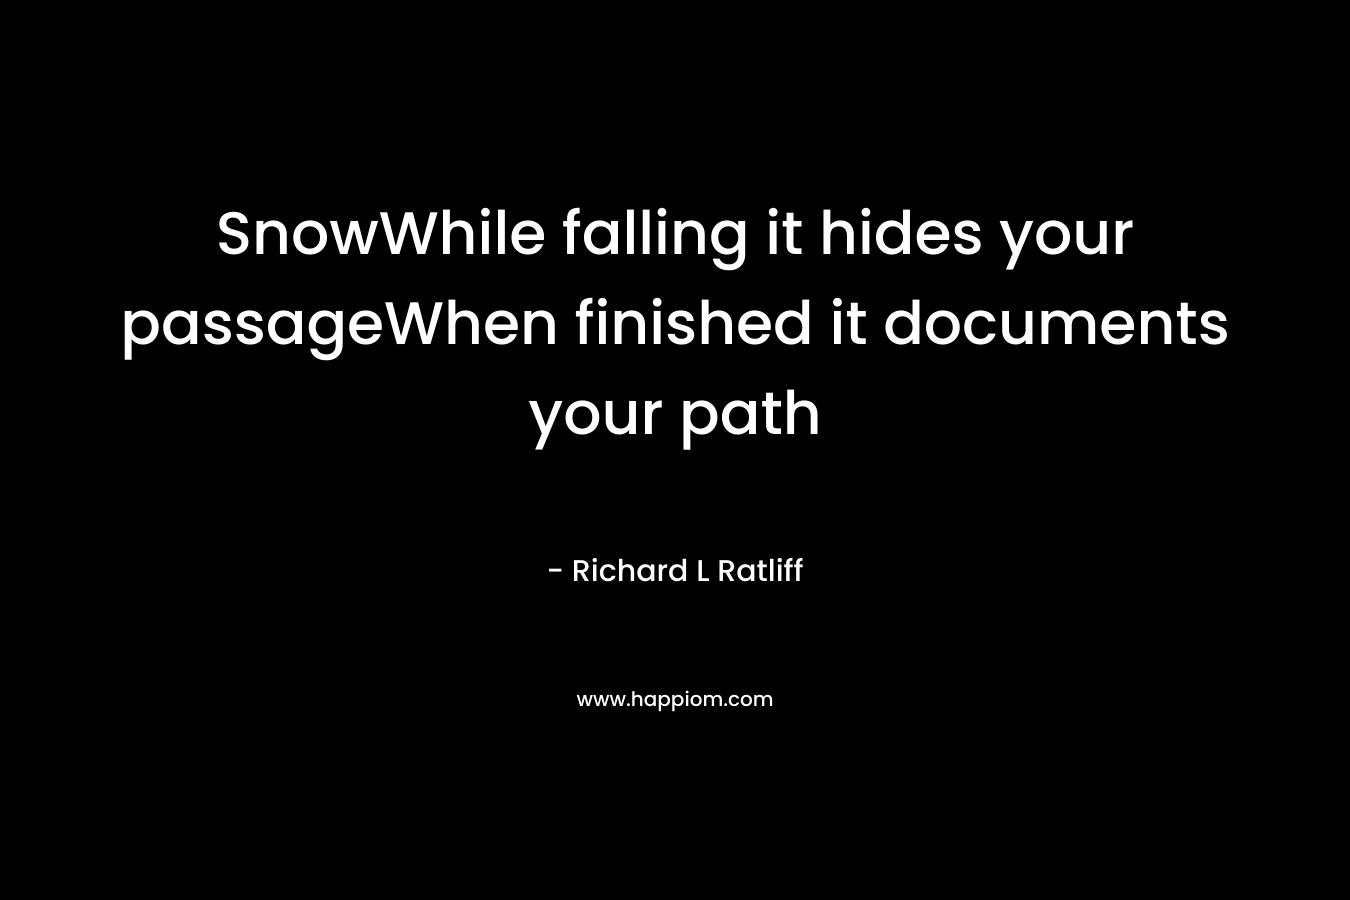 SnowWhile falling it hides your passageWhen finished it documents your path